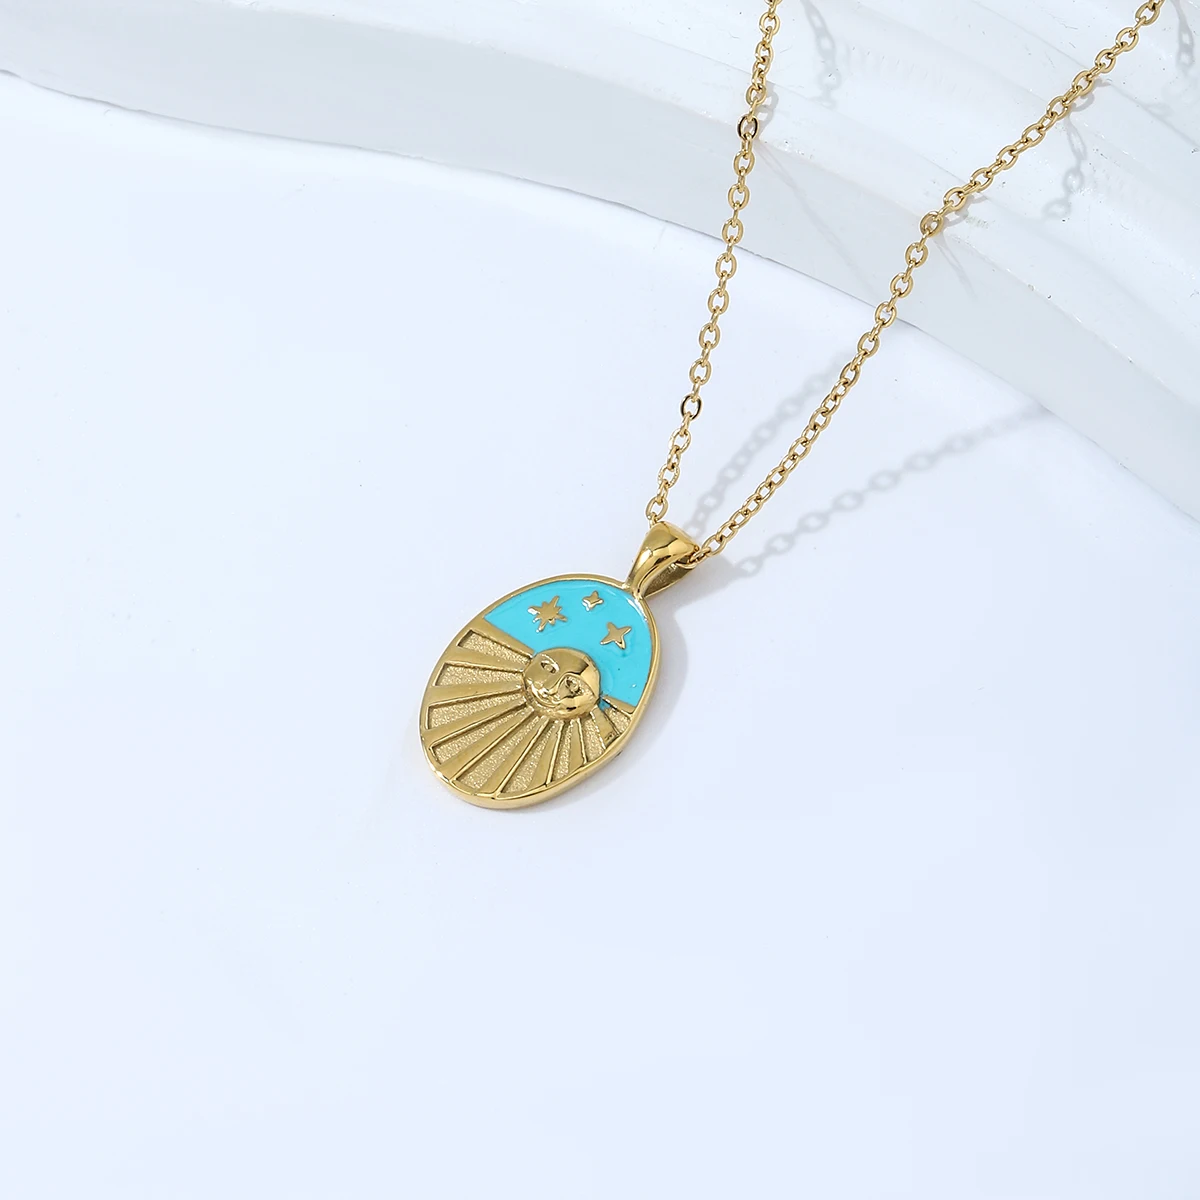 

Ruigang RGN2450 Tarnish Free 18K Gold Plated Stainless Steel Necklace Vintage Oval Shape Enamel Sun Star Design Pendant Necklace